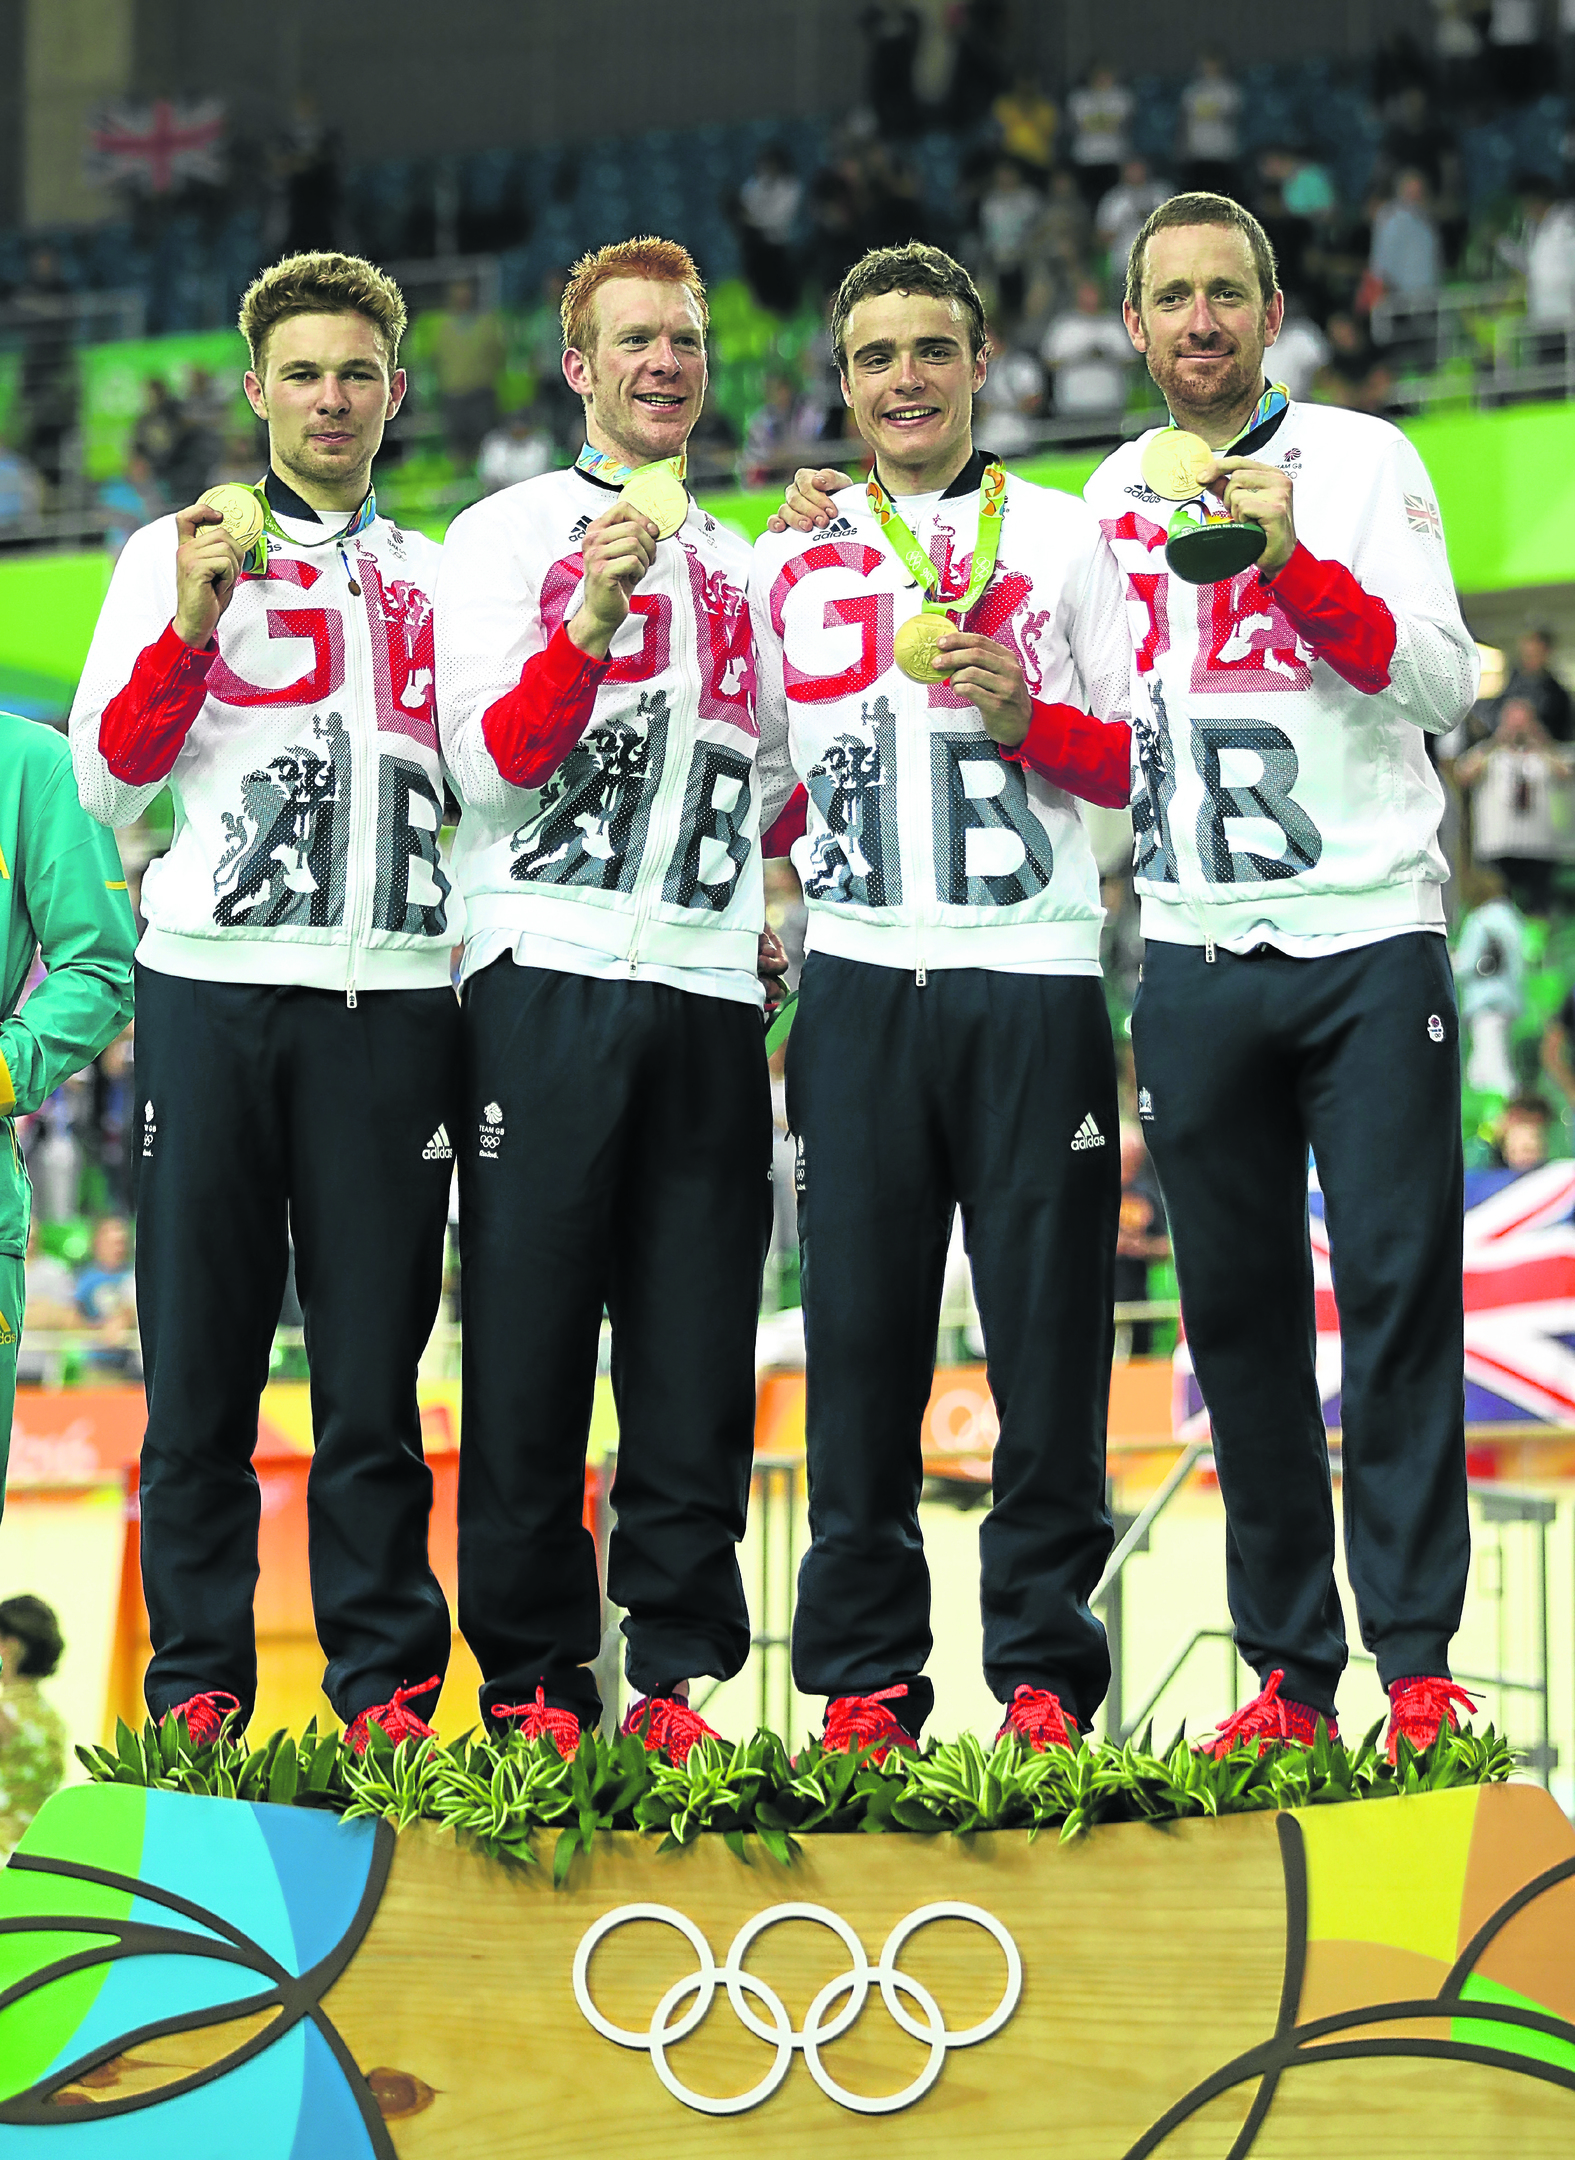 Gold medallists Owain Doull, Edward Clancy, Steven Burke and Bradley Wiggins of Team Great Britain pose for photographs (Photo by Bryn Lennon/Getty Images)